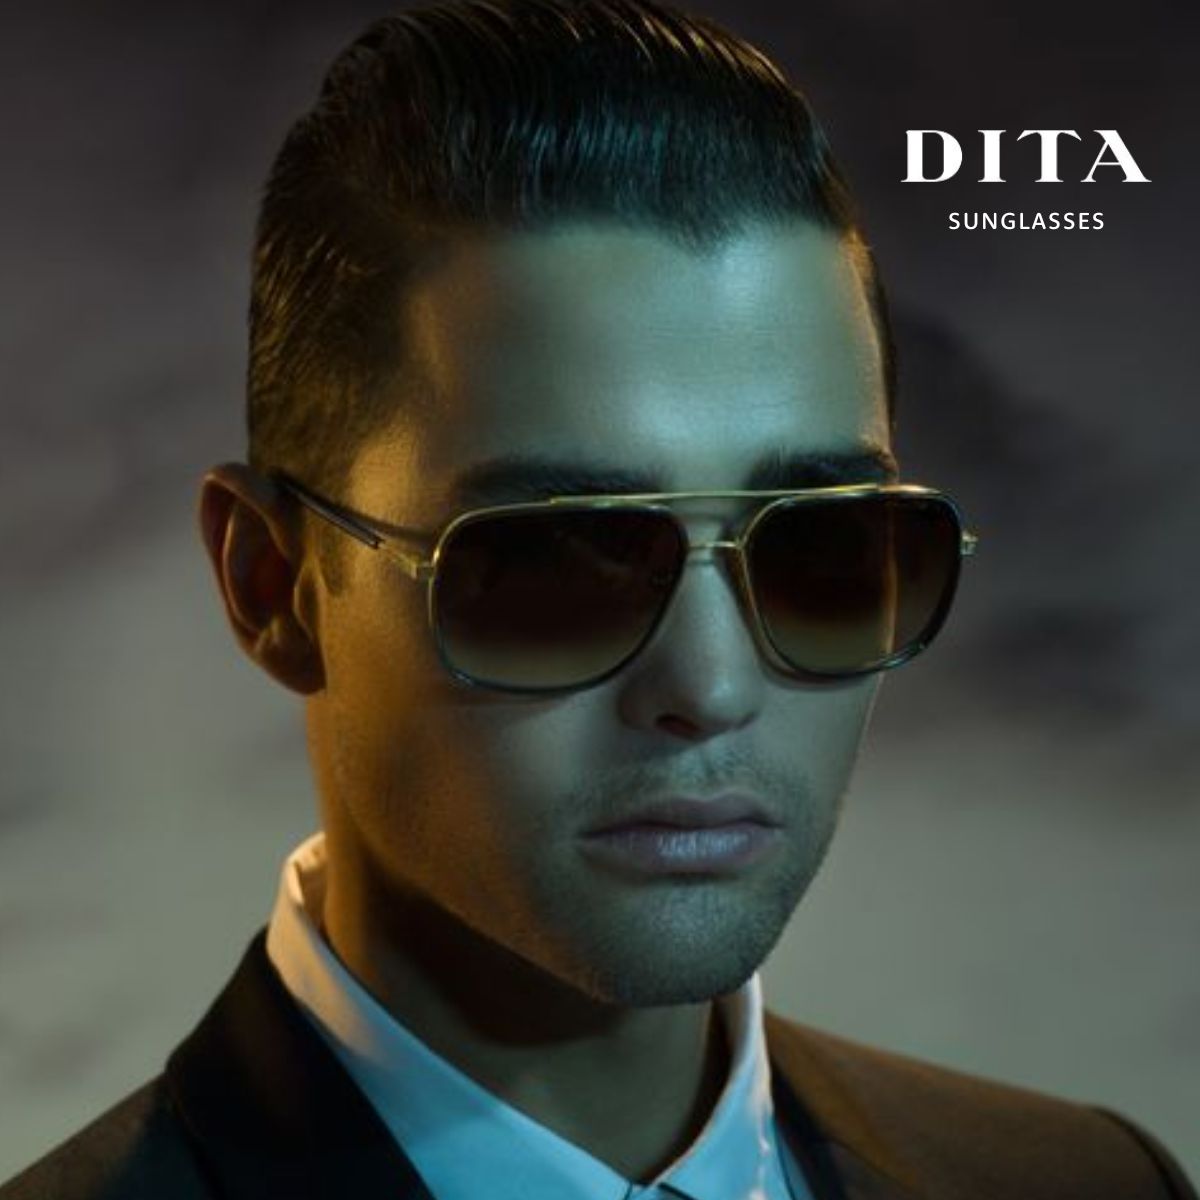 "Dita sunglasses collection for men and women at Optorium."